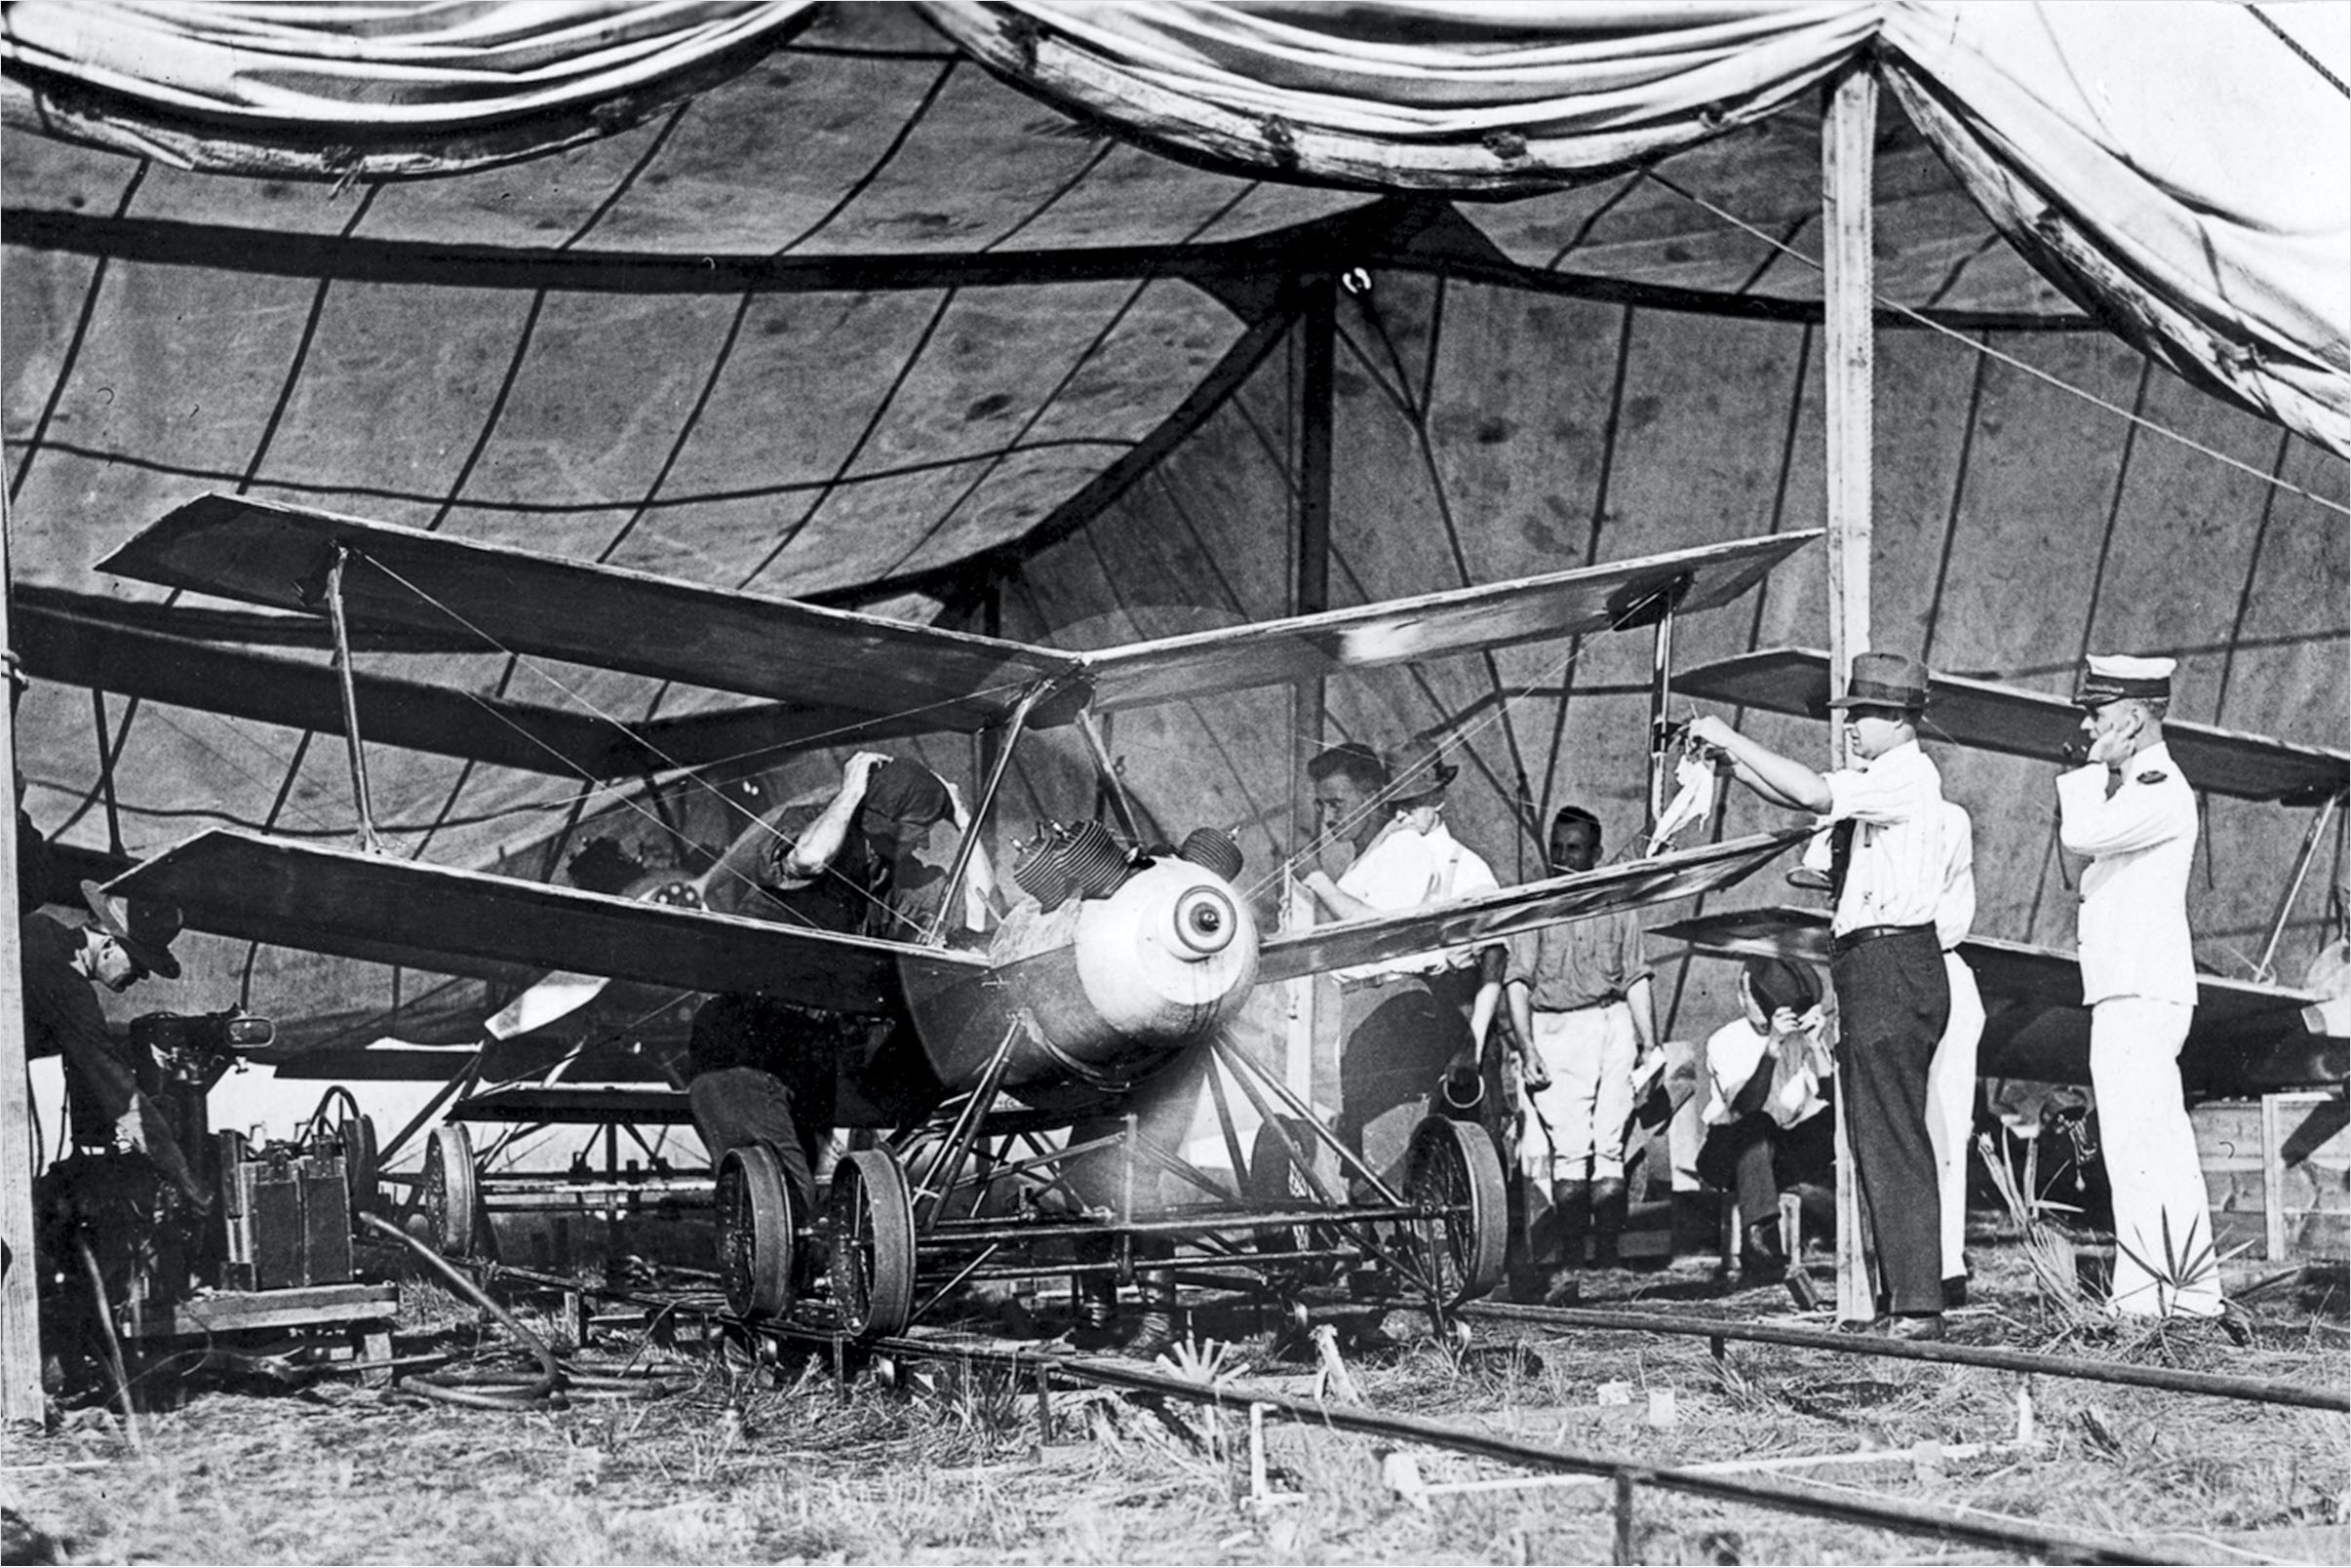 The Kettering Bug drone, unmanned aerial vehicle (UAV) Photo US Air Force Museum, 1918.jpg